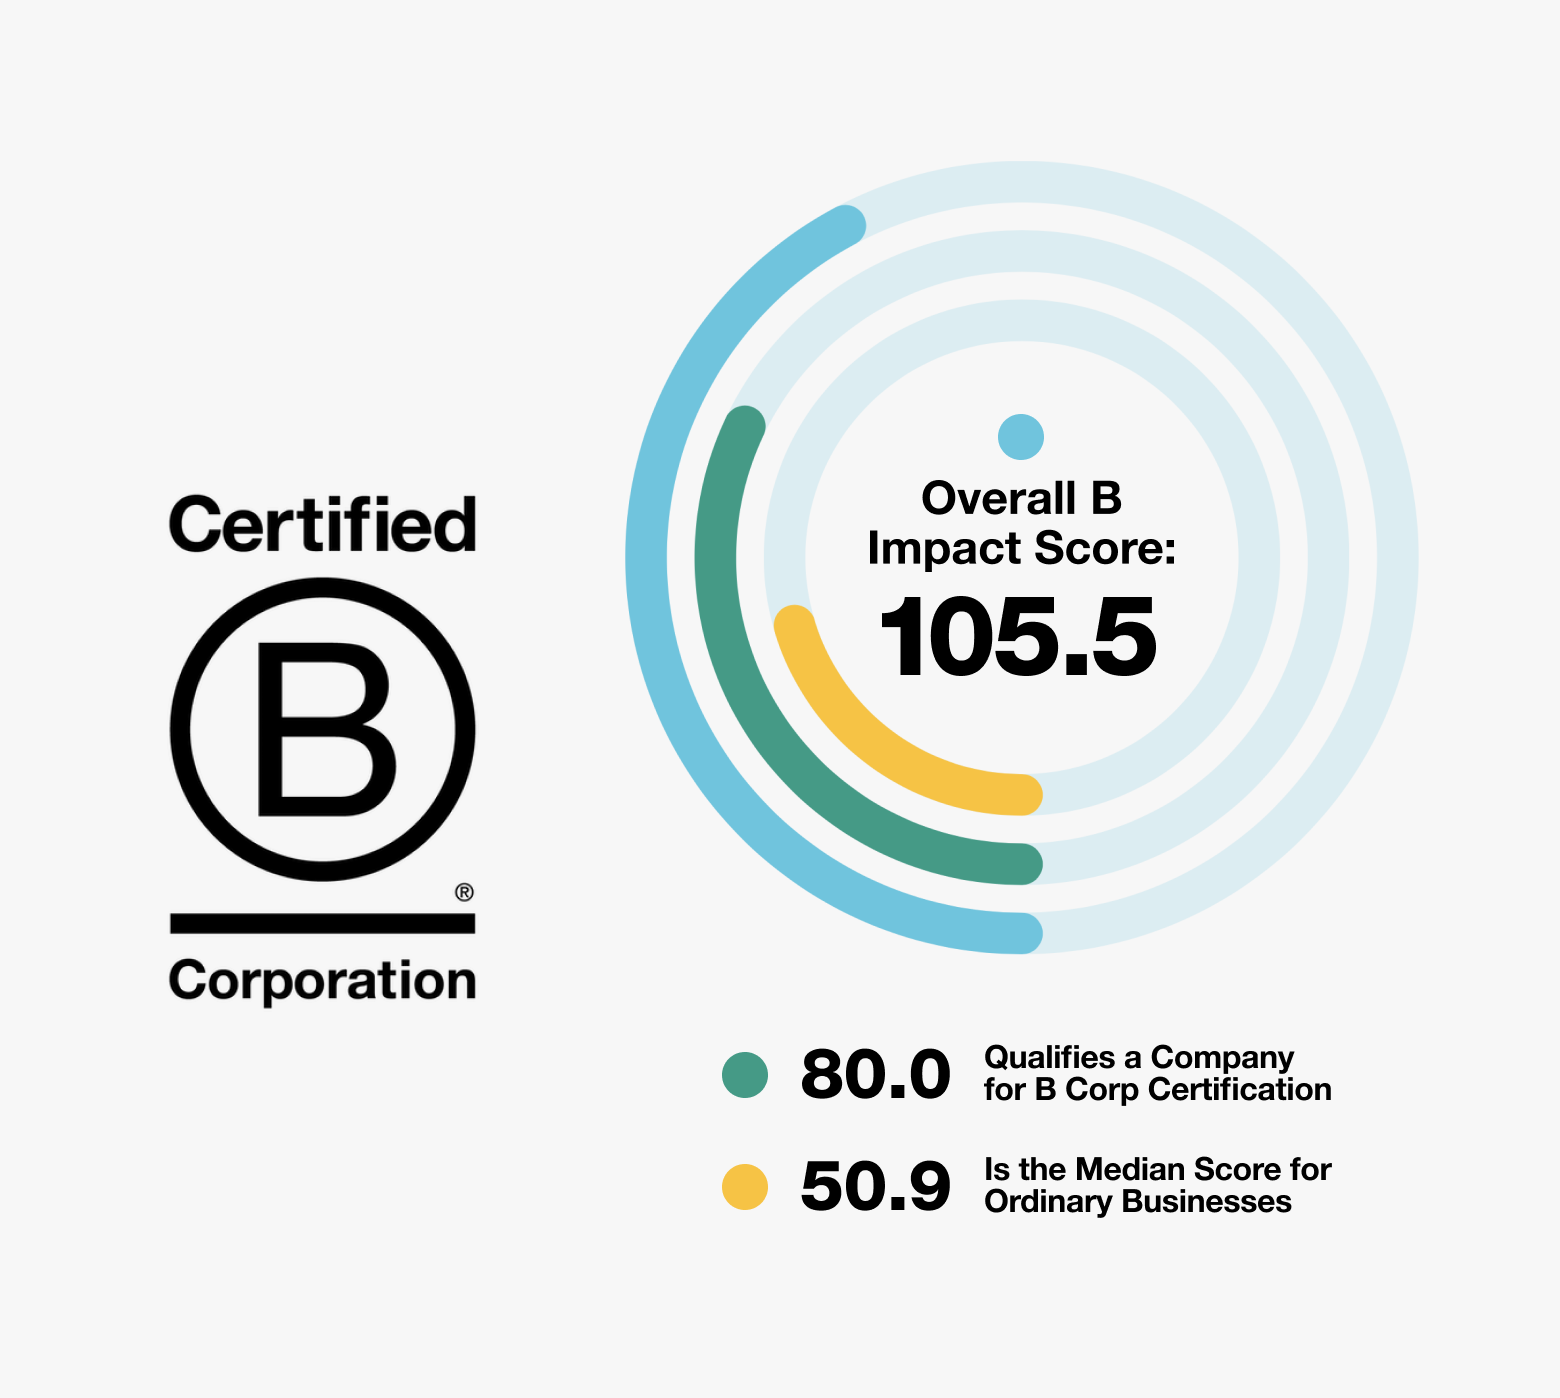 B corp certified with Overall B impact score of 105.5.